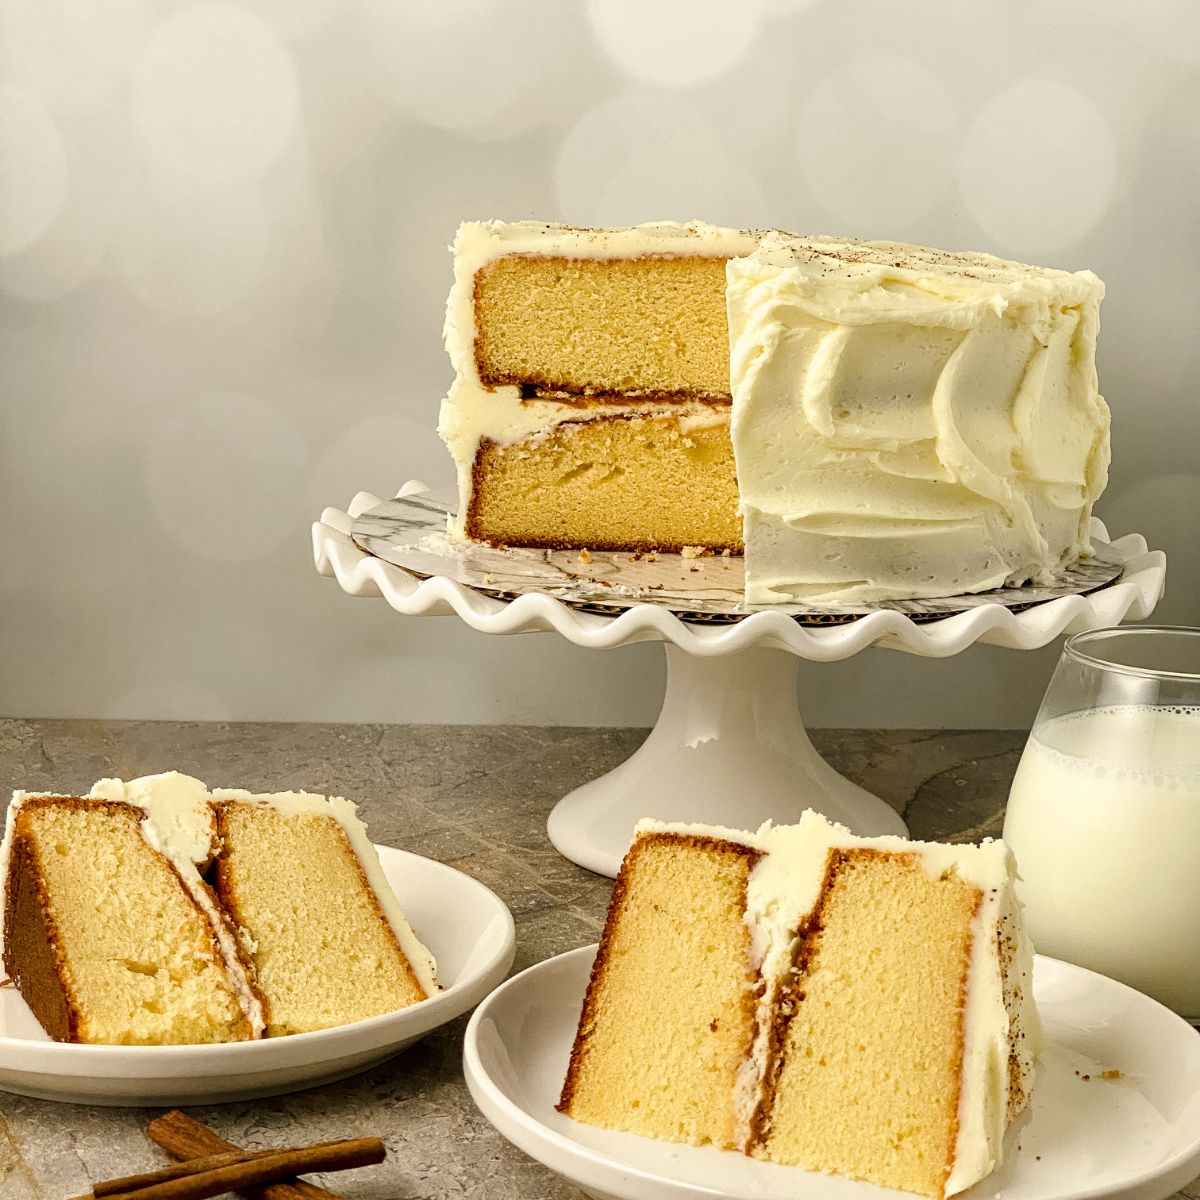 Two slices of cake from an eggnog cake on a pedastal.